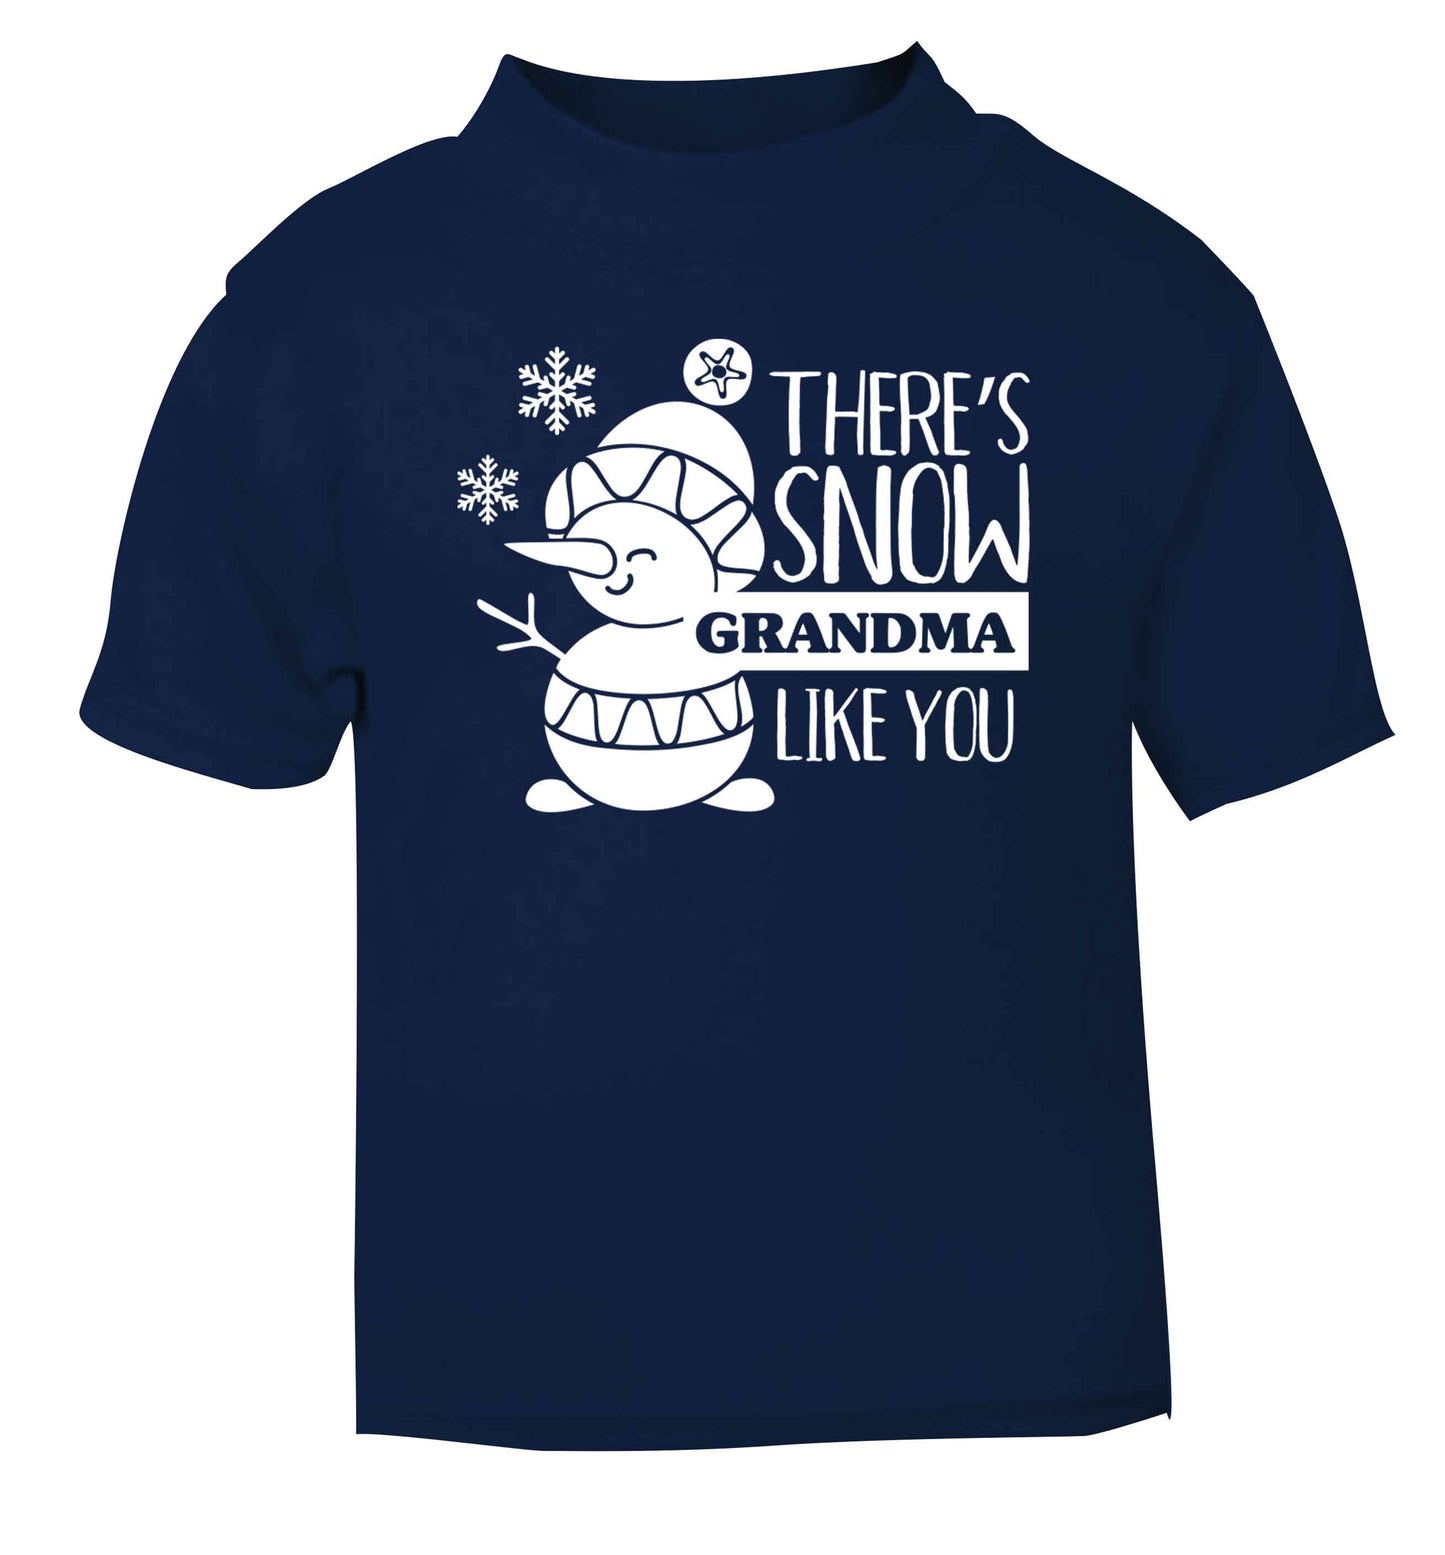 There's snow grandma like you navy baby toddler Tshirt 2 Years